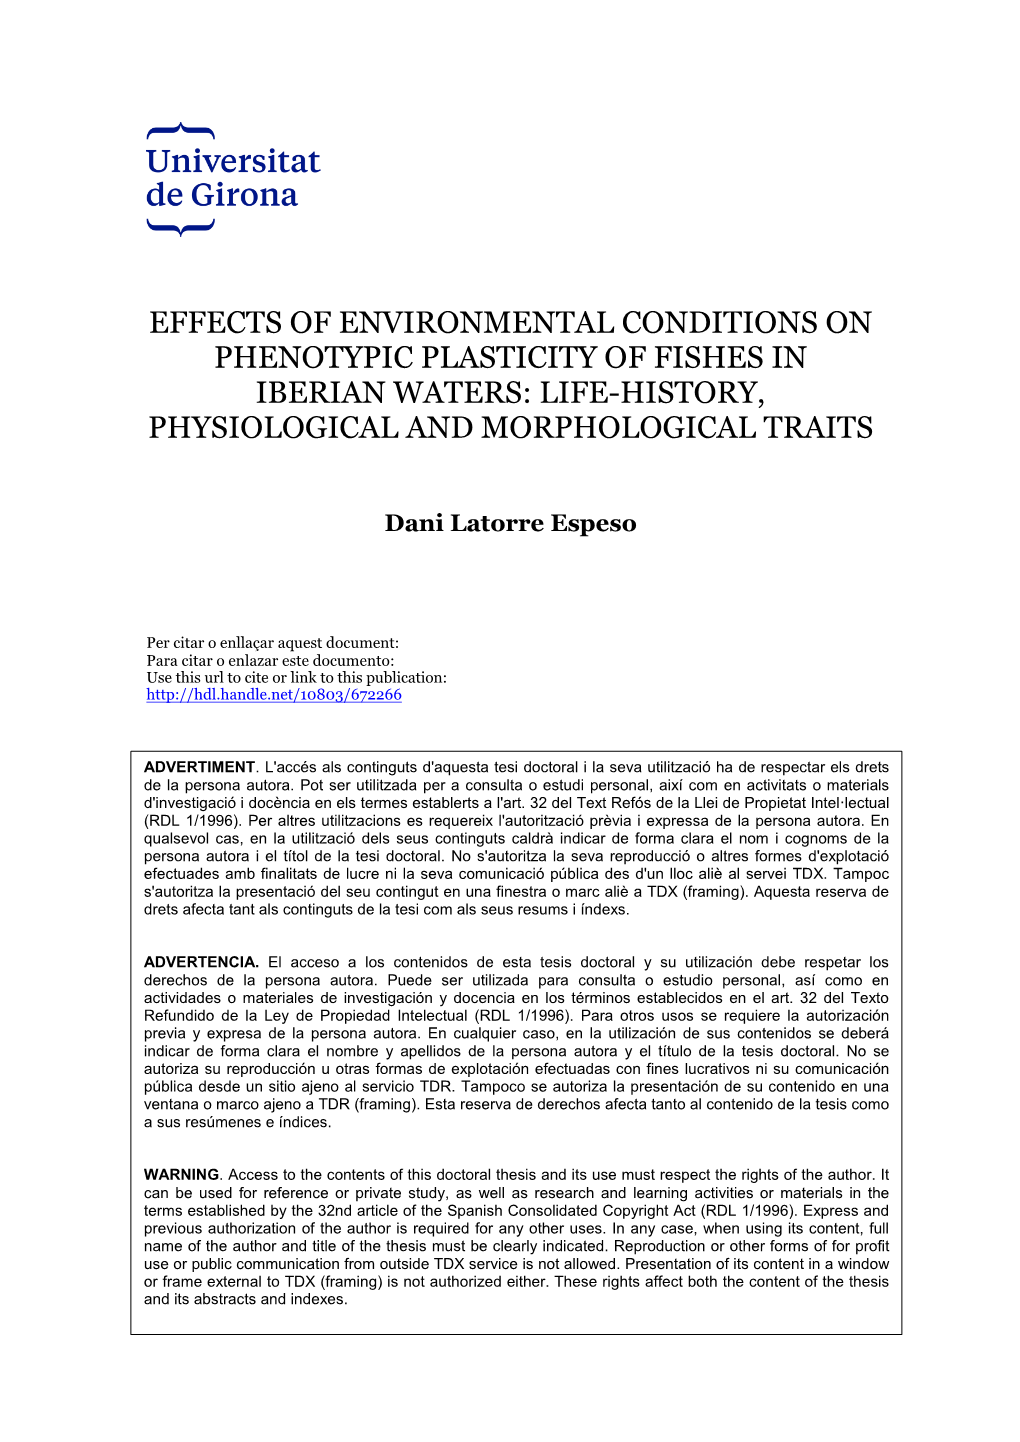 Effects of Environmental Conditions on Phenotypic Plasticity of Fishes in Iberian Waters: Life-History, Physiological and Morphological Traits